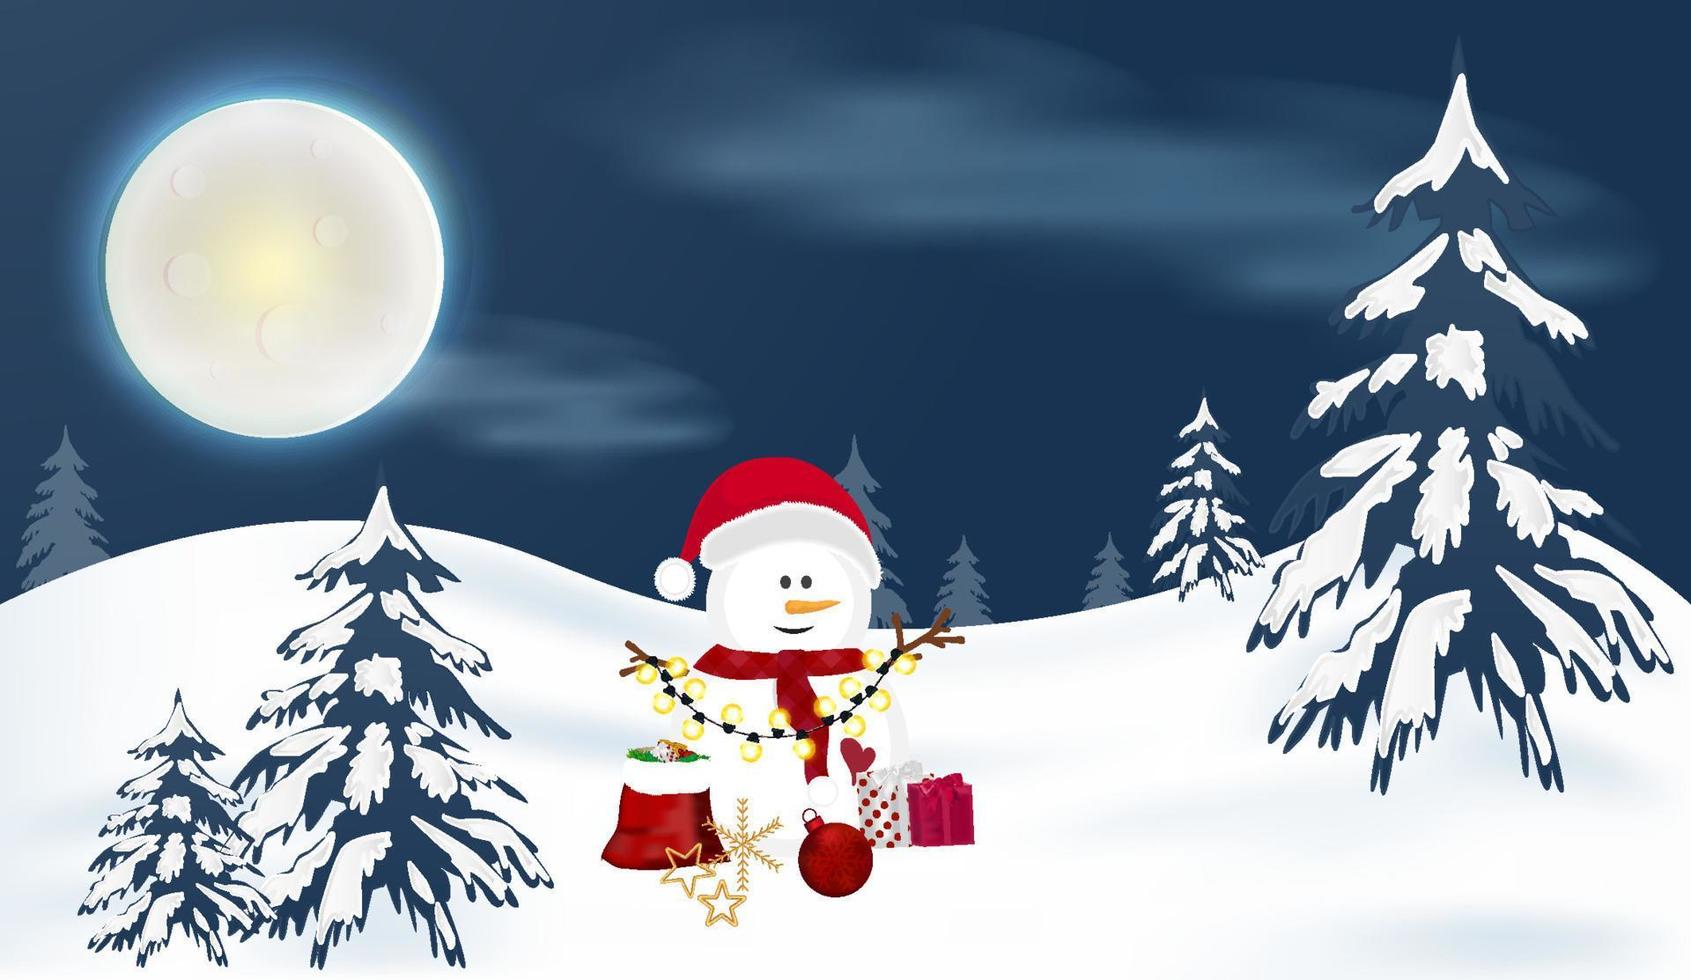 Christmas and Winter Background vector